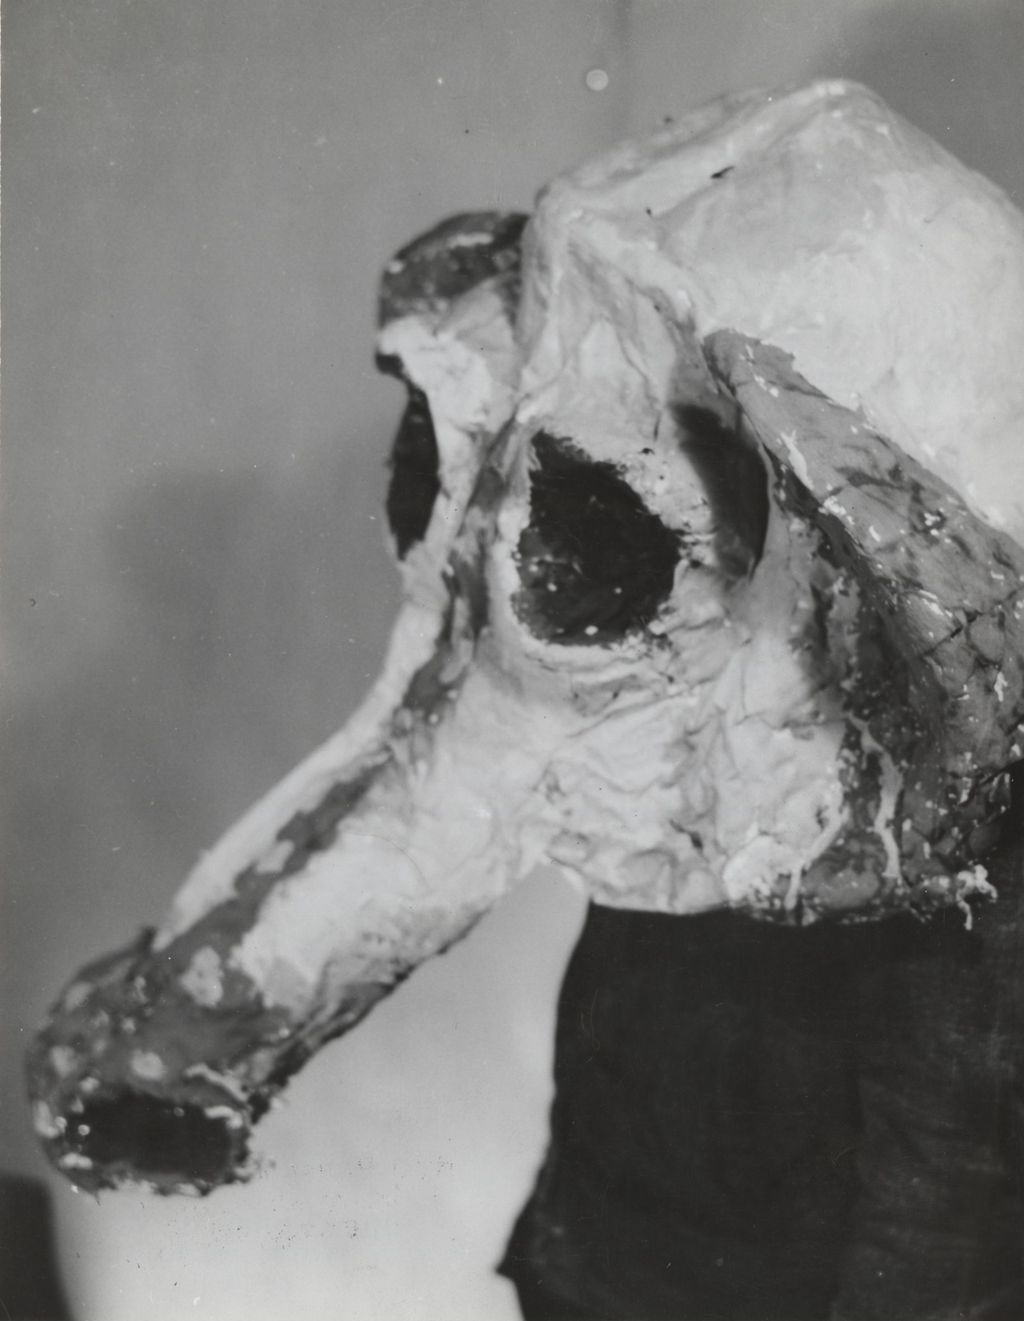 Papier-mache animal mask created for Hull-House 50th Anniversary circus